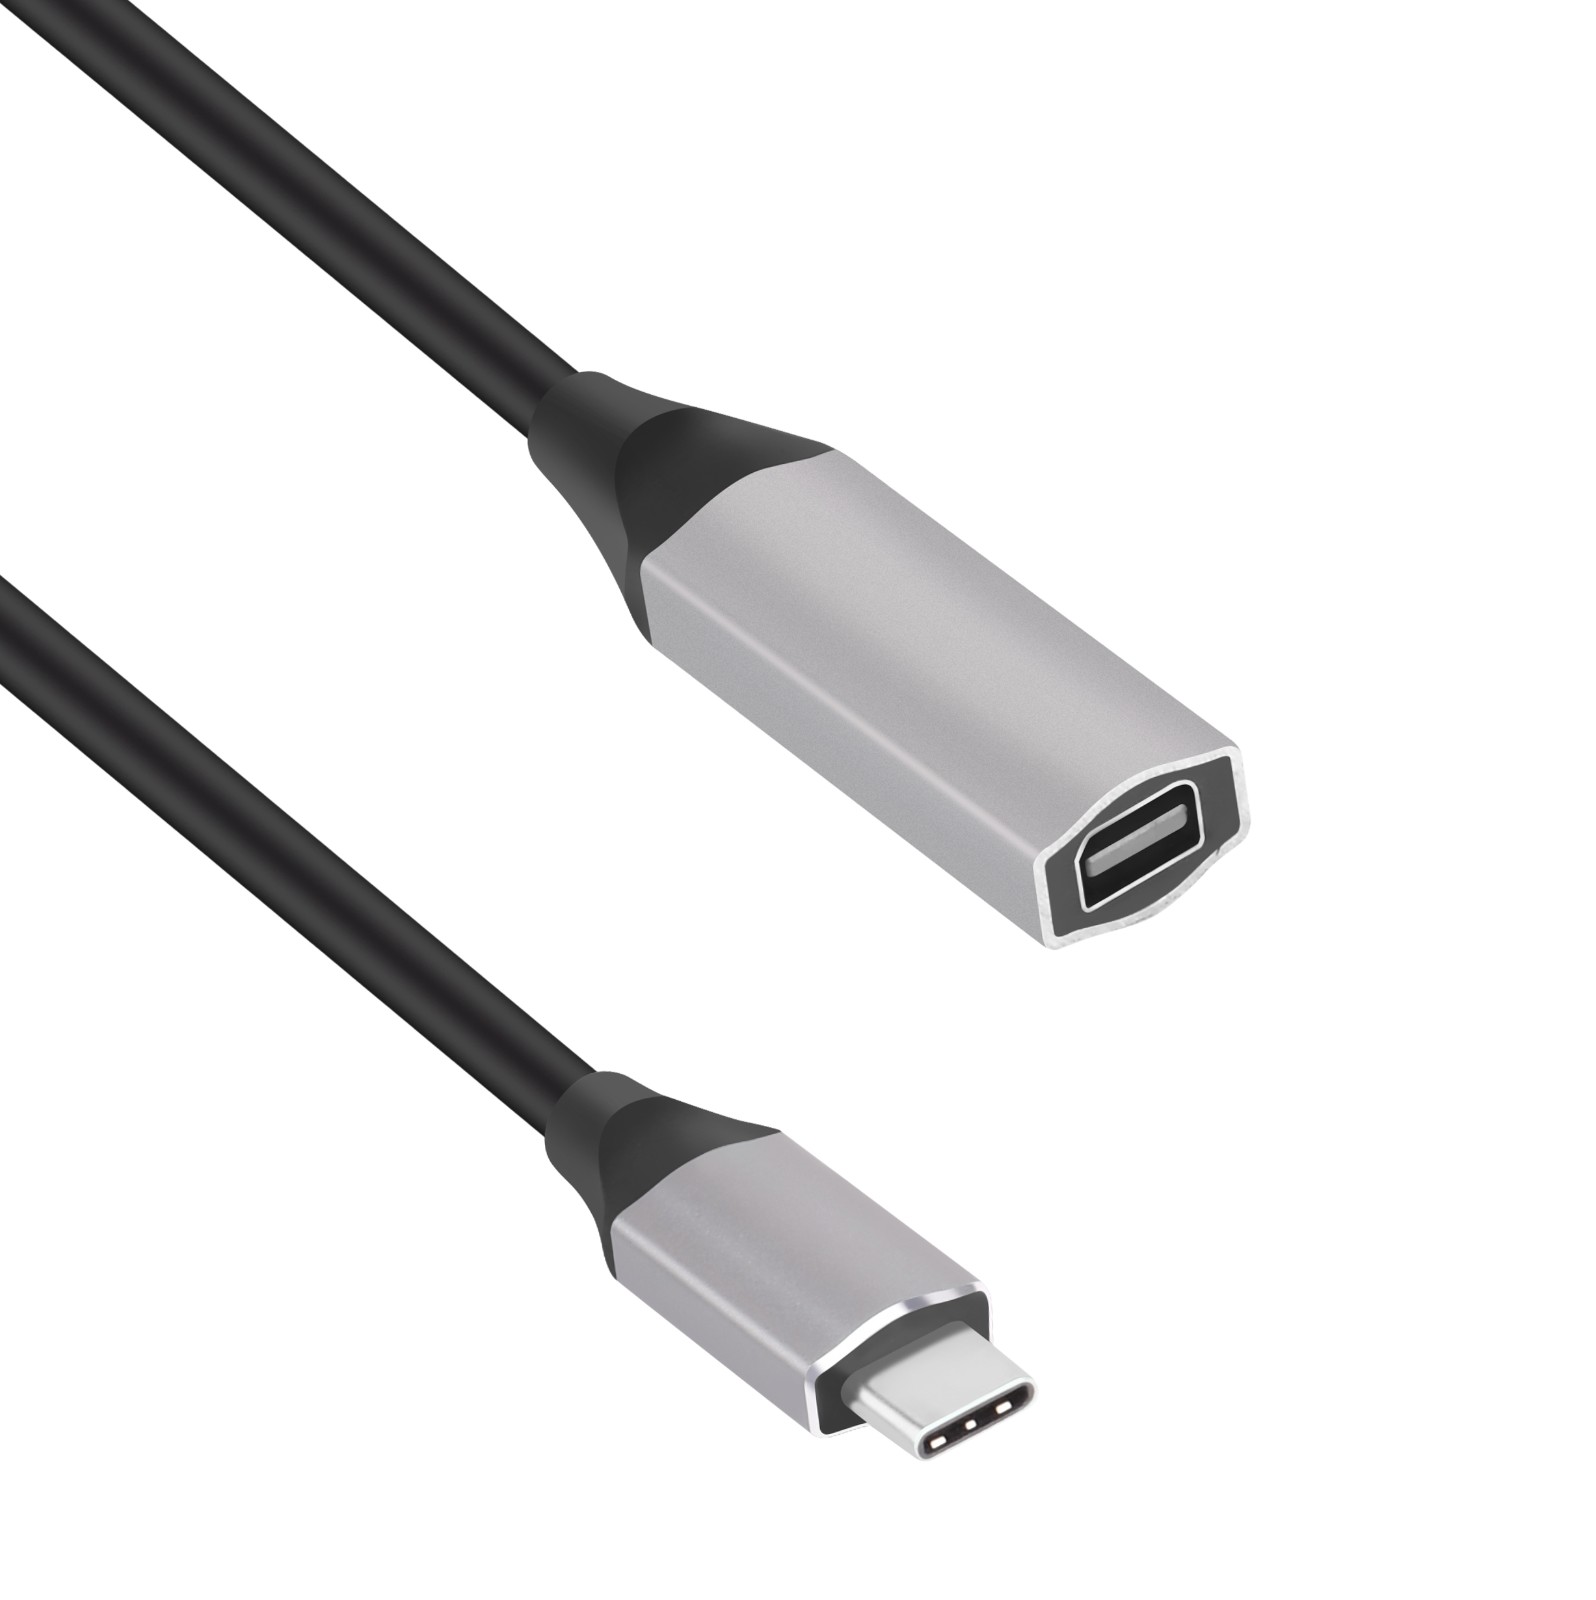 USB C to MINI DP Adapter Cable